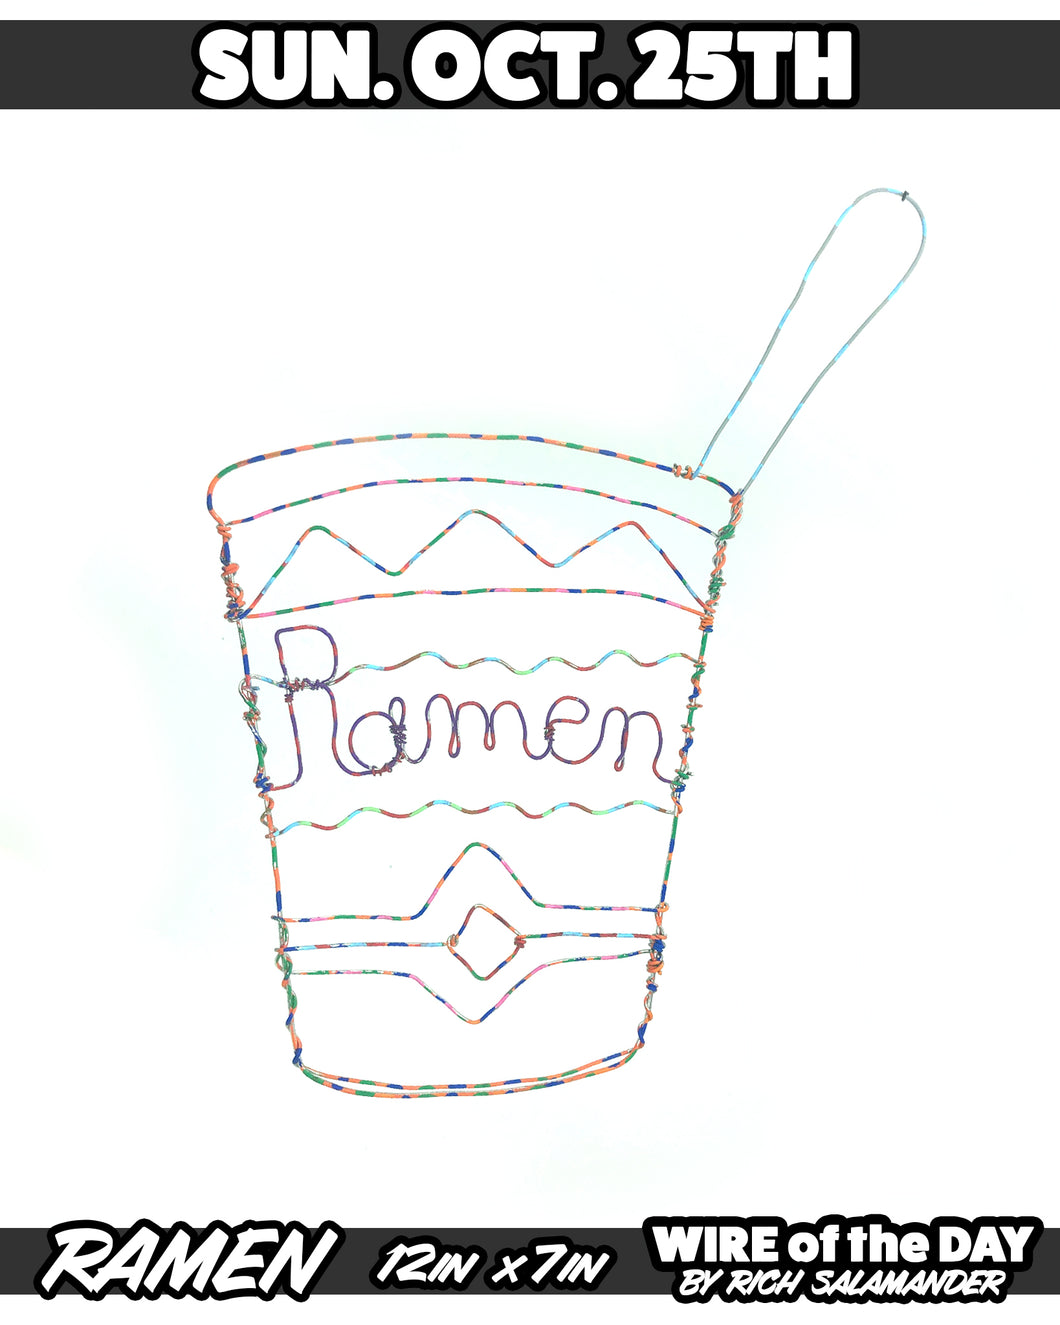 WIRE of the DAY RAMEN